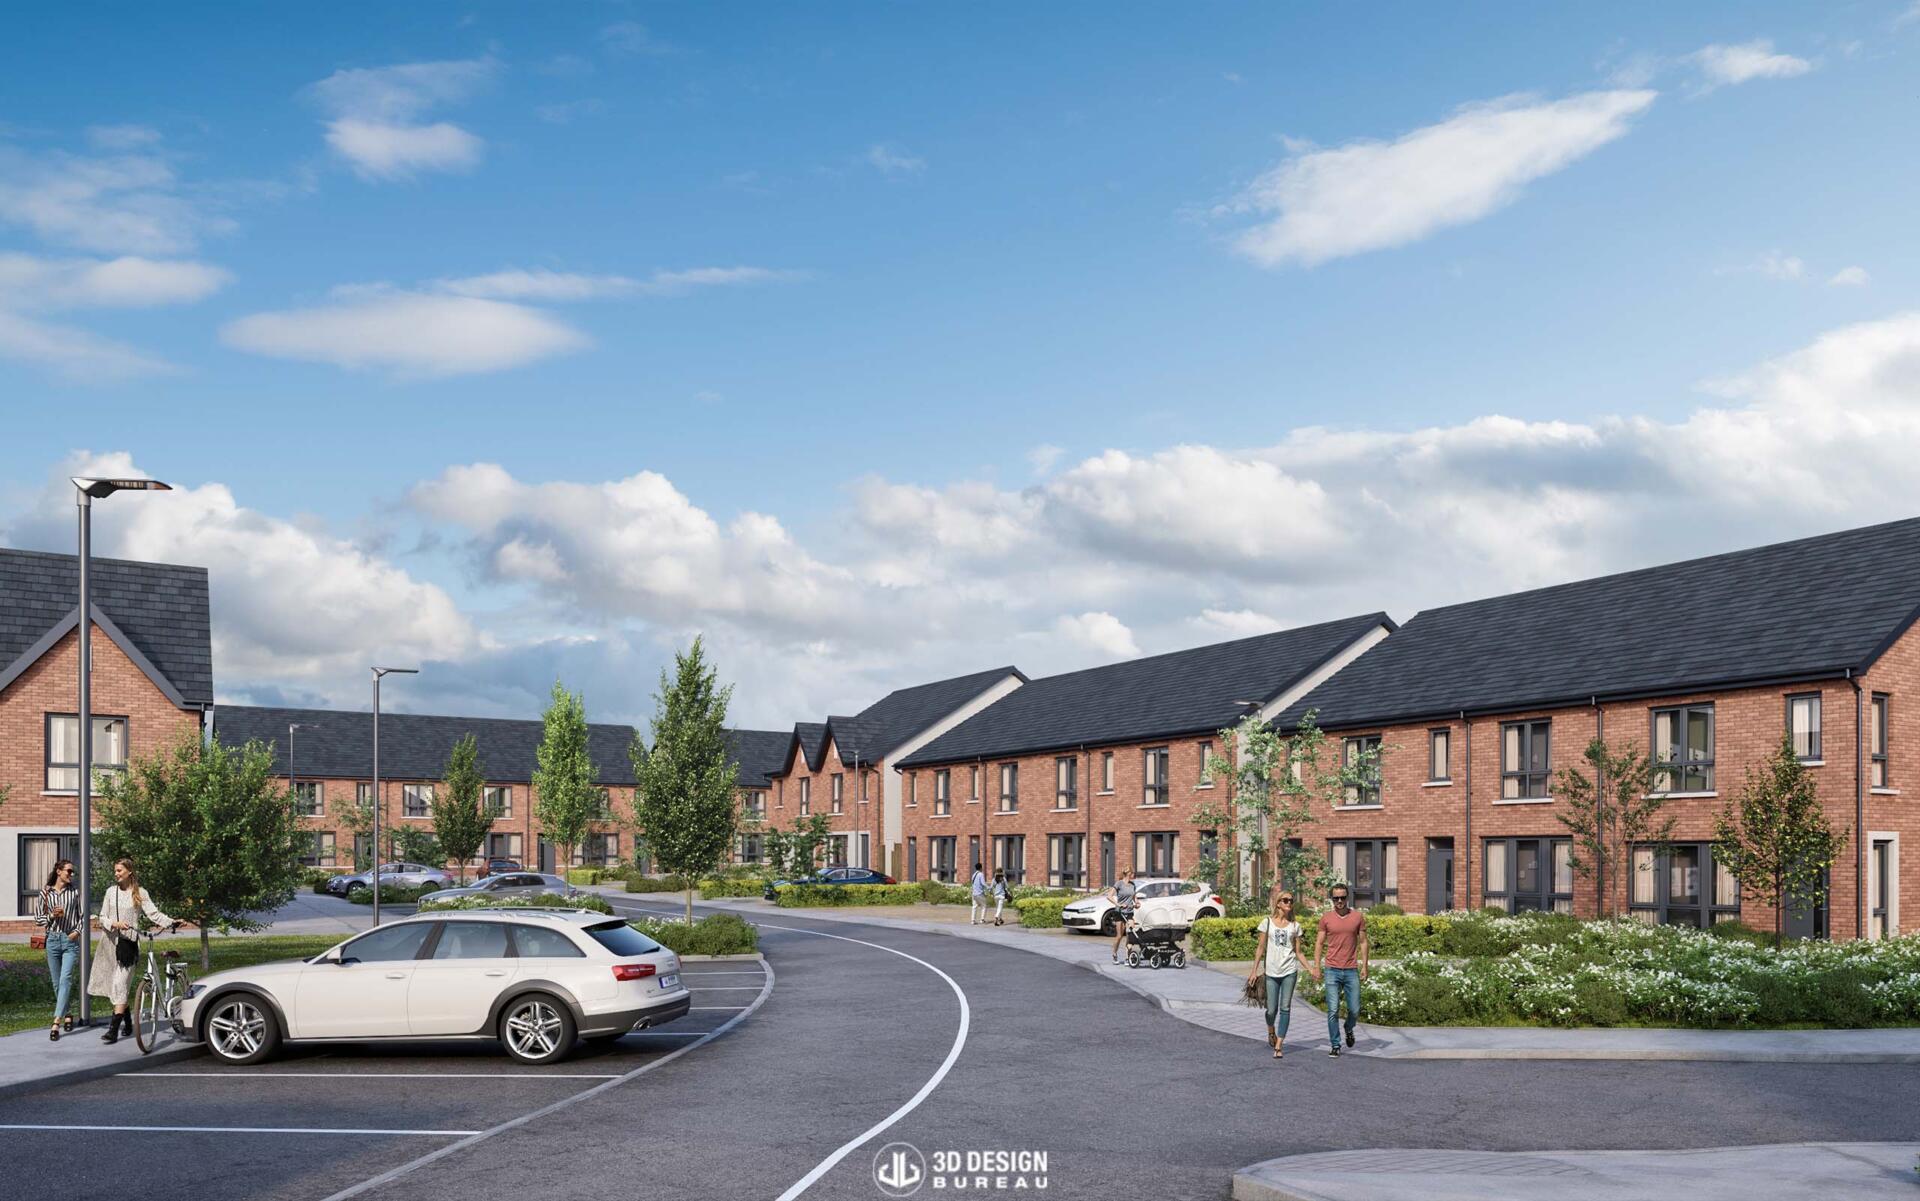 Computer generated imagery of the proposed development in Clane